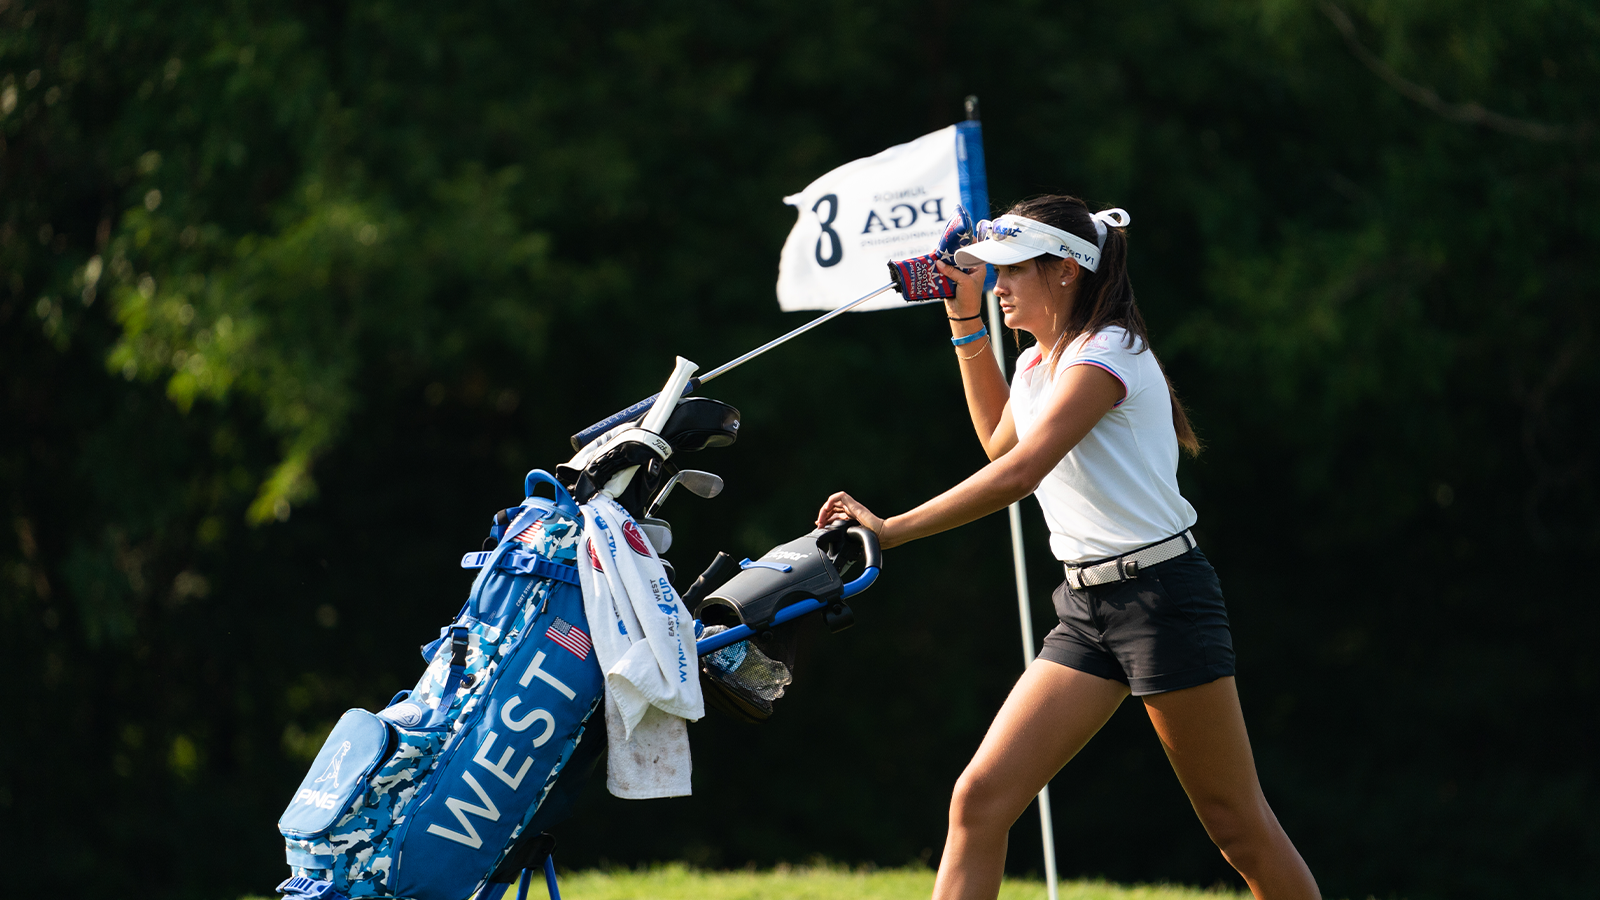 Kiara Romero on the eighth green during the third round for the 46th Boys and Girls Junior PGA Championship held at Cog Hill Golf & Country Club on August 4, 2022 in Lemont, Illinois. (Photo by Hailey Garrett/PGA of America)